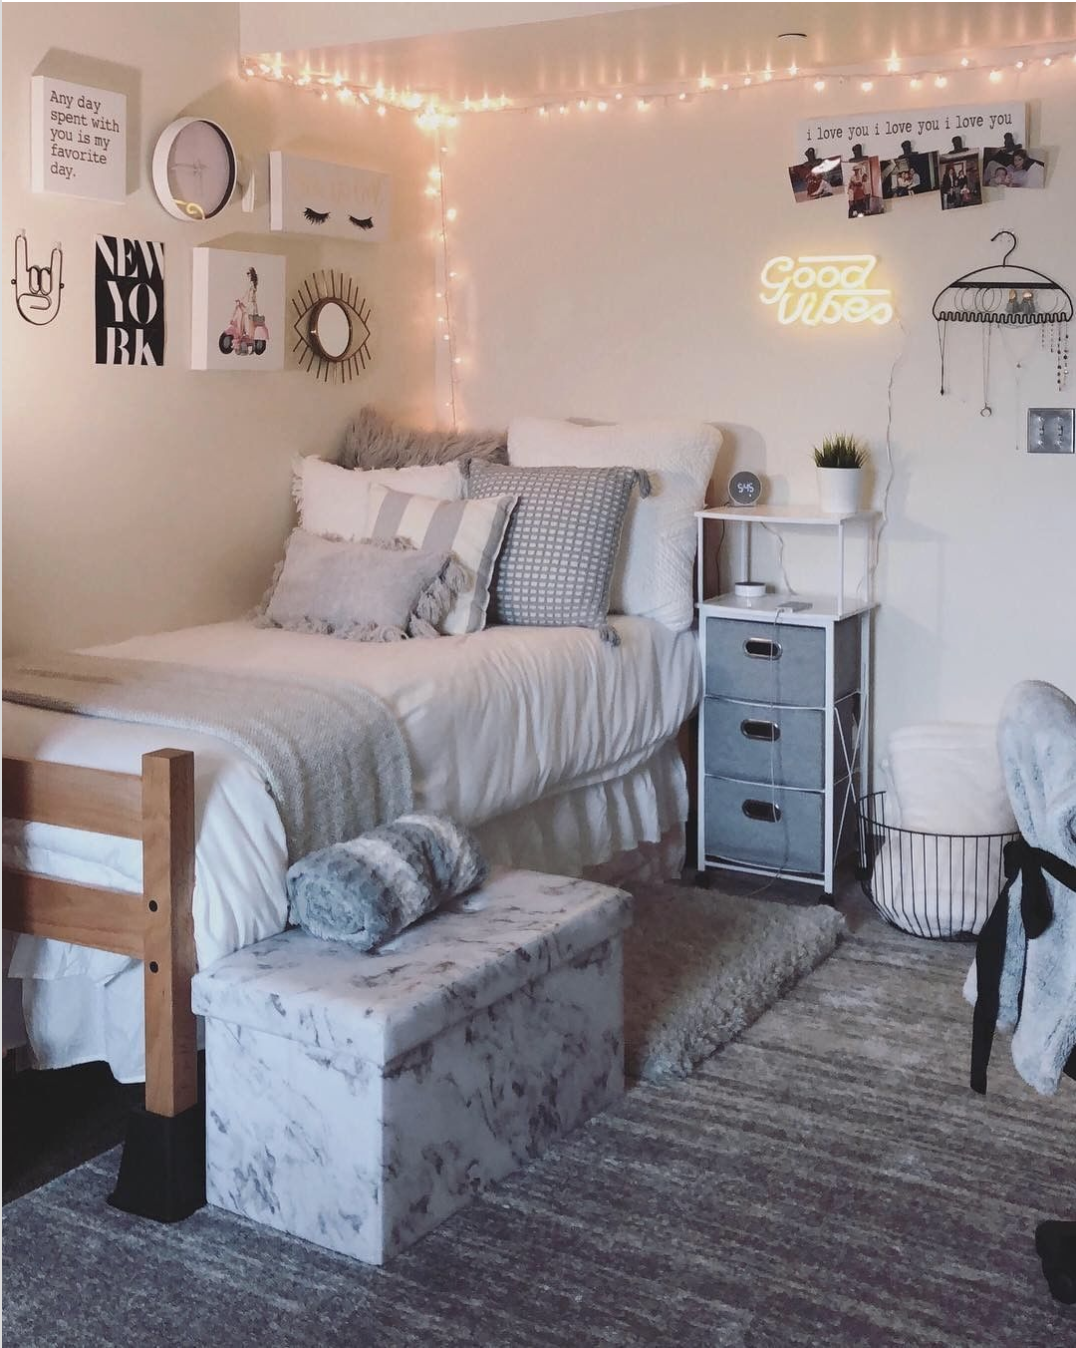 How to decorate your dorm room - College Life Today -   18 room decor Simple ideas